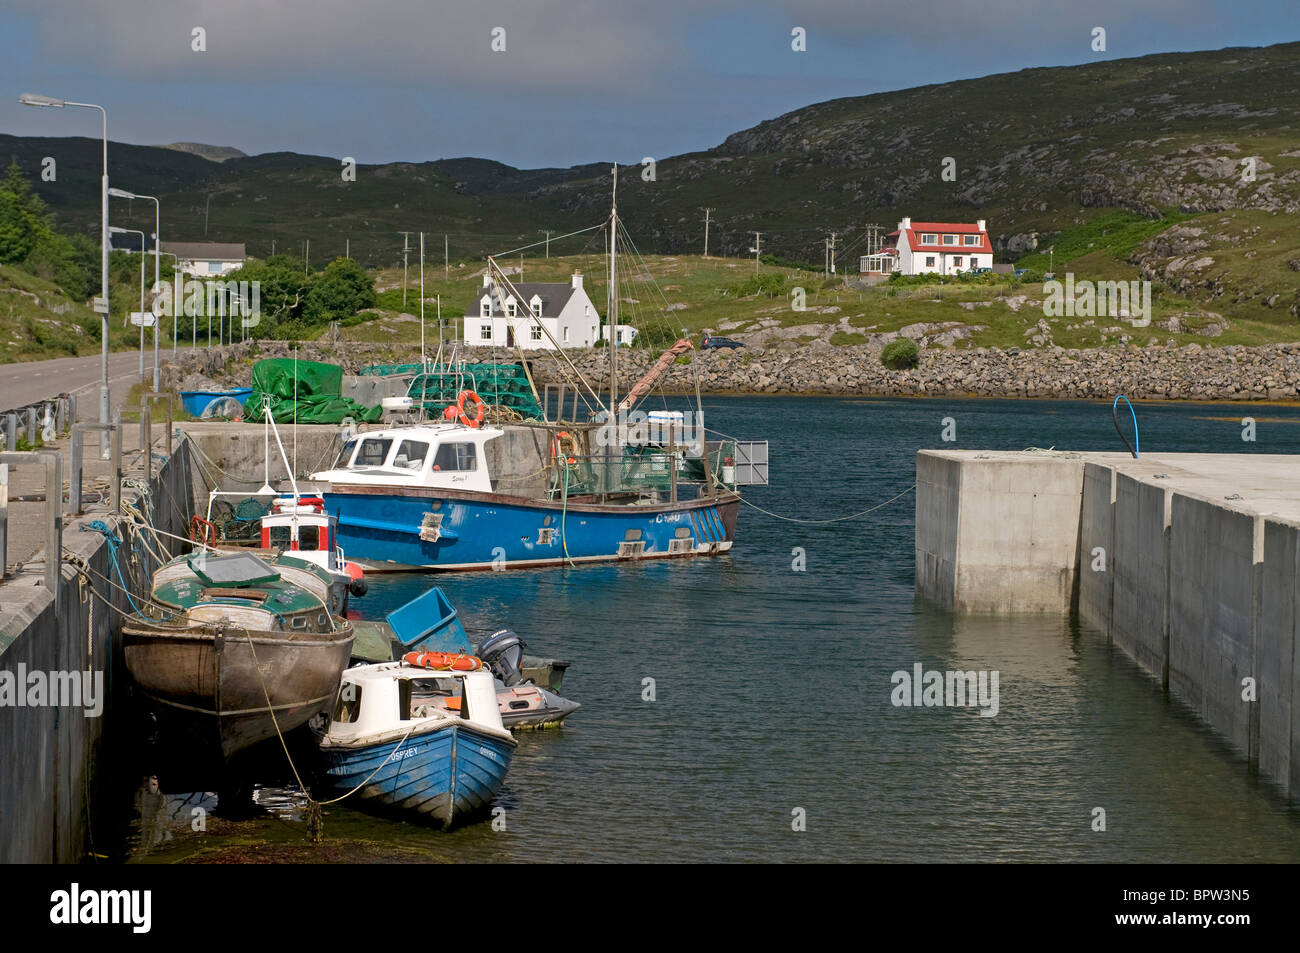 The new harbour Isle at Northbay Isle of Barra. Outer Hebrides, Western Isles. Scotland.  SCO 6513 Stock Photo